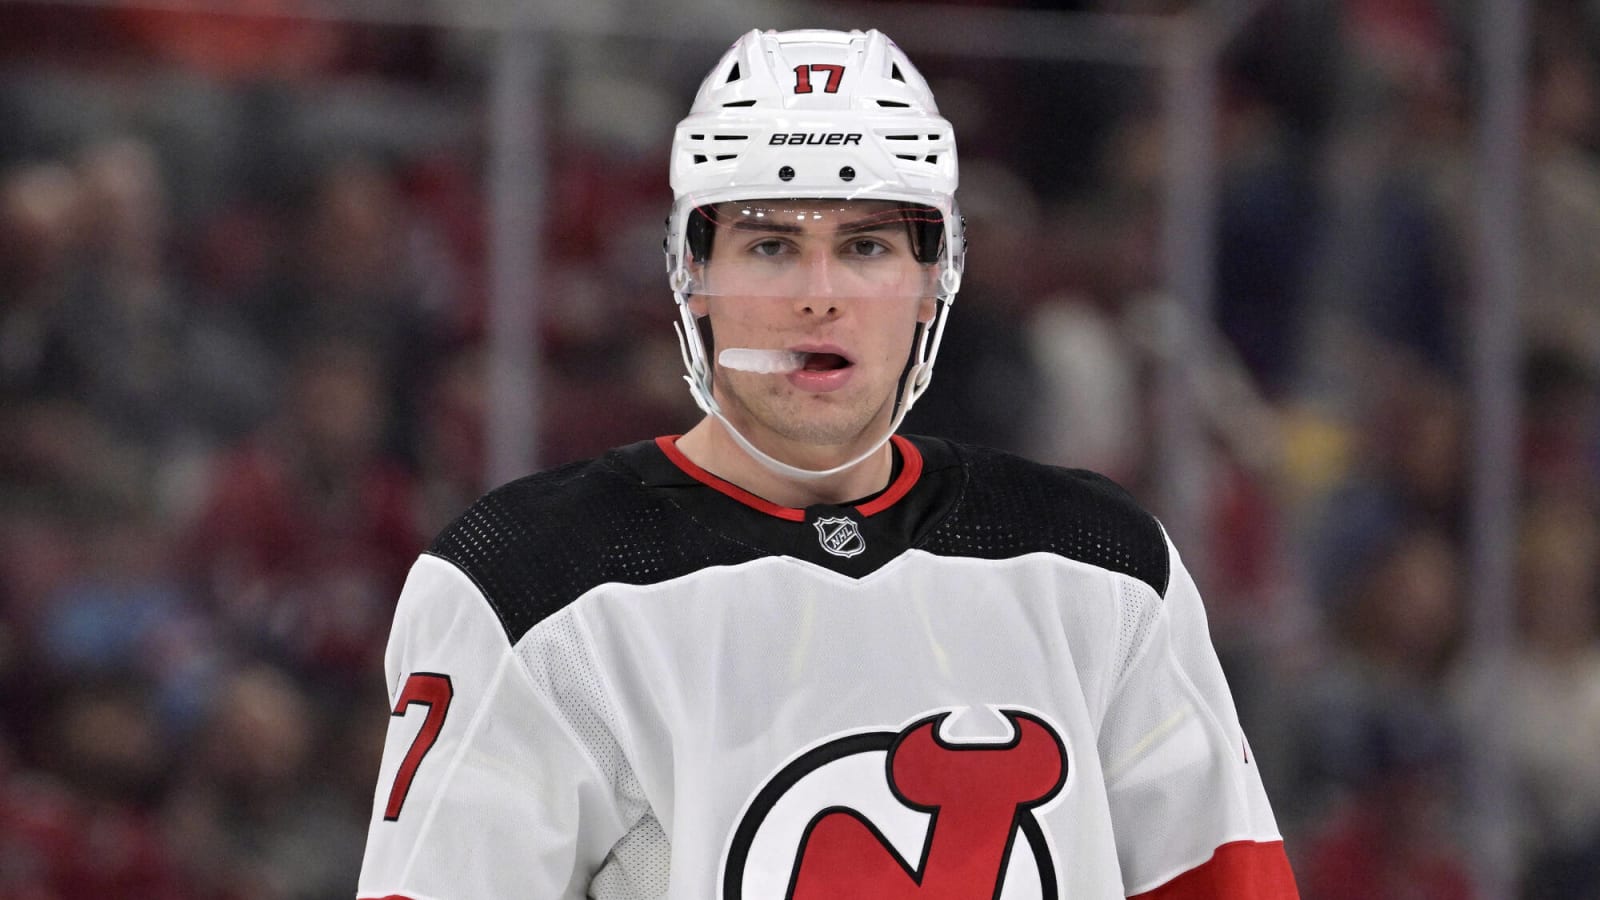 Šimon Nemec Quickly Earning Devils’ Trust and Confidence